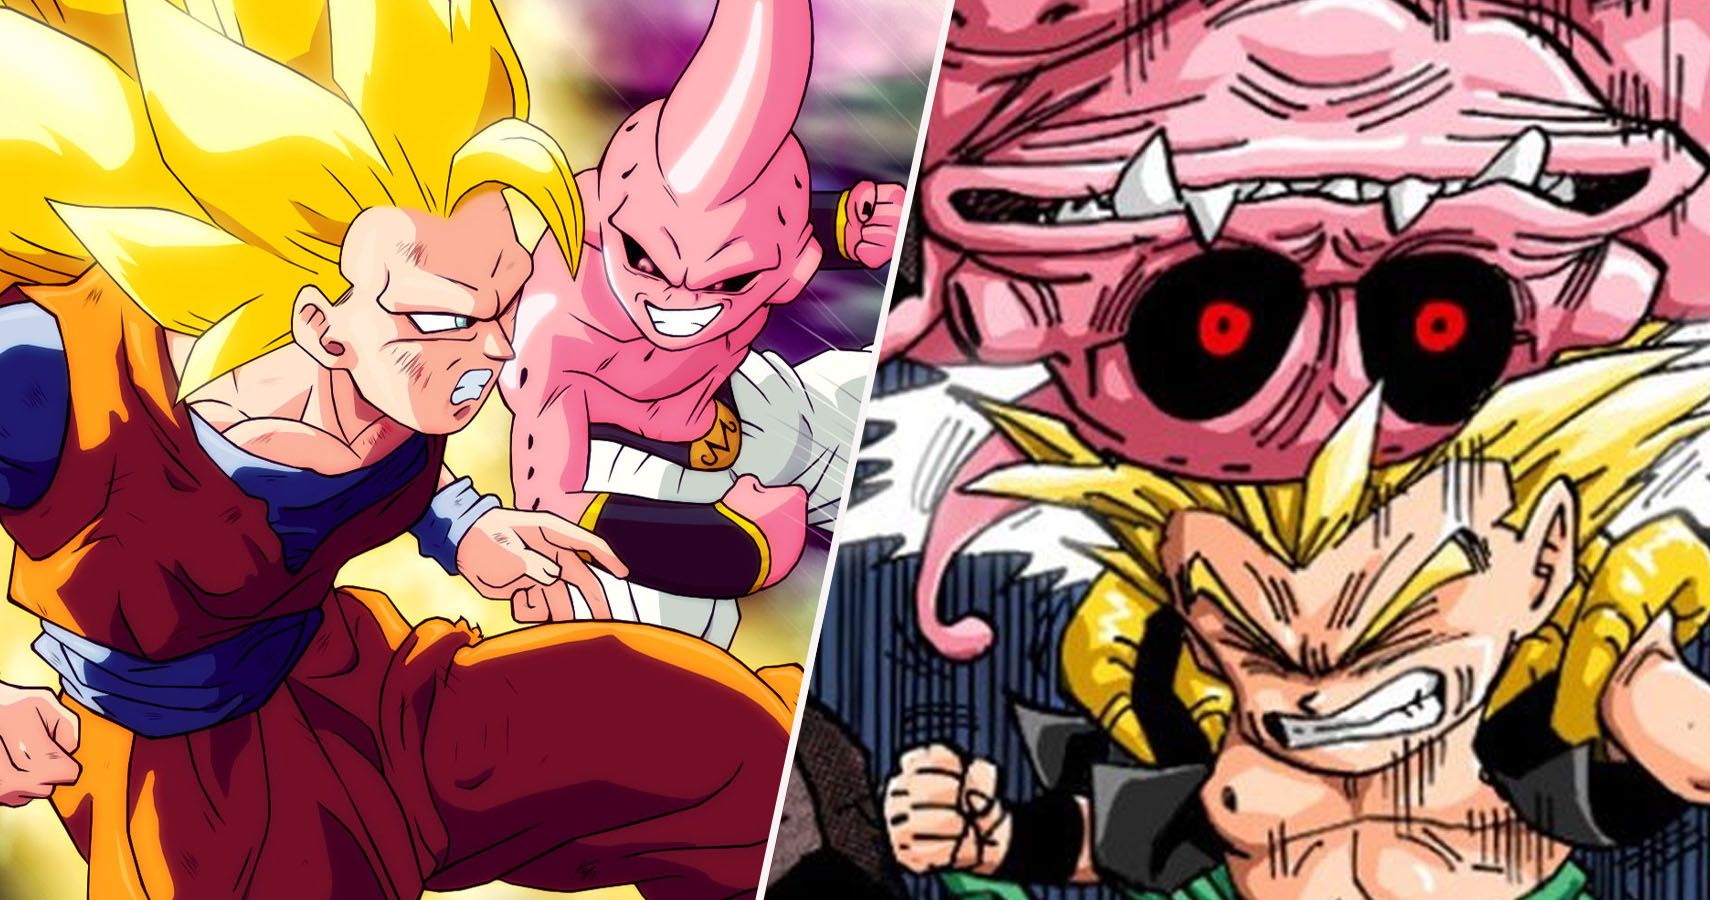 Kamer Traditioneel zij is Dragon Ball Z: Every Version Of Majin Buu From Weakest To Most Powerful,  Ranked (According To The Manga)